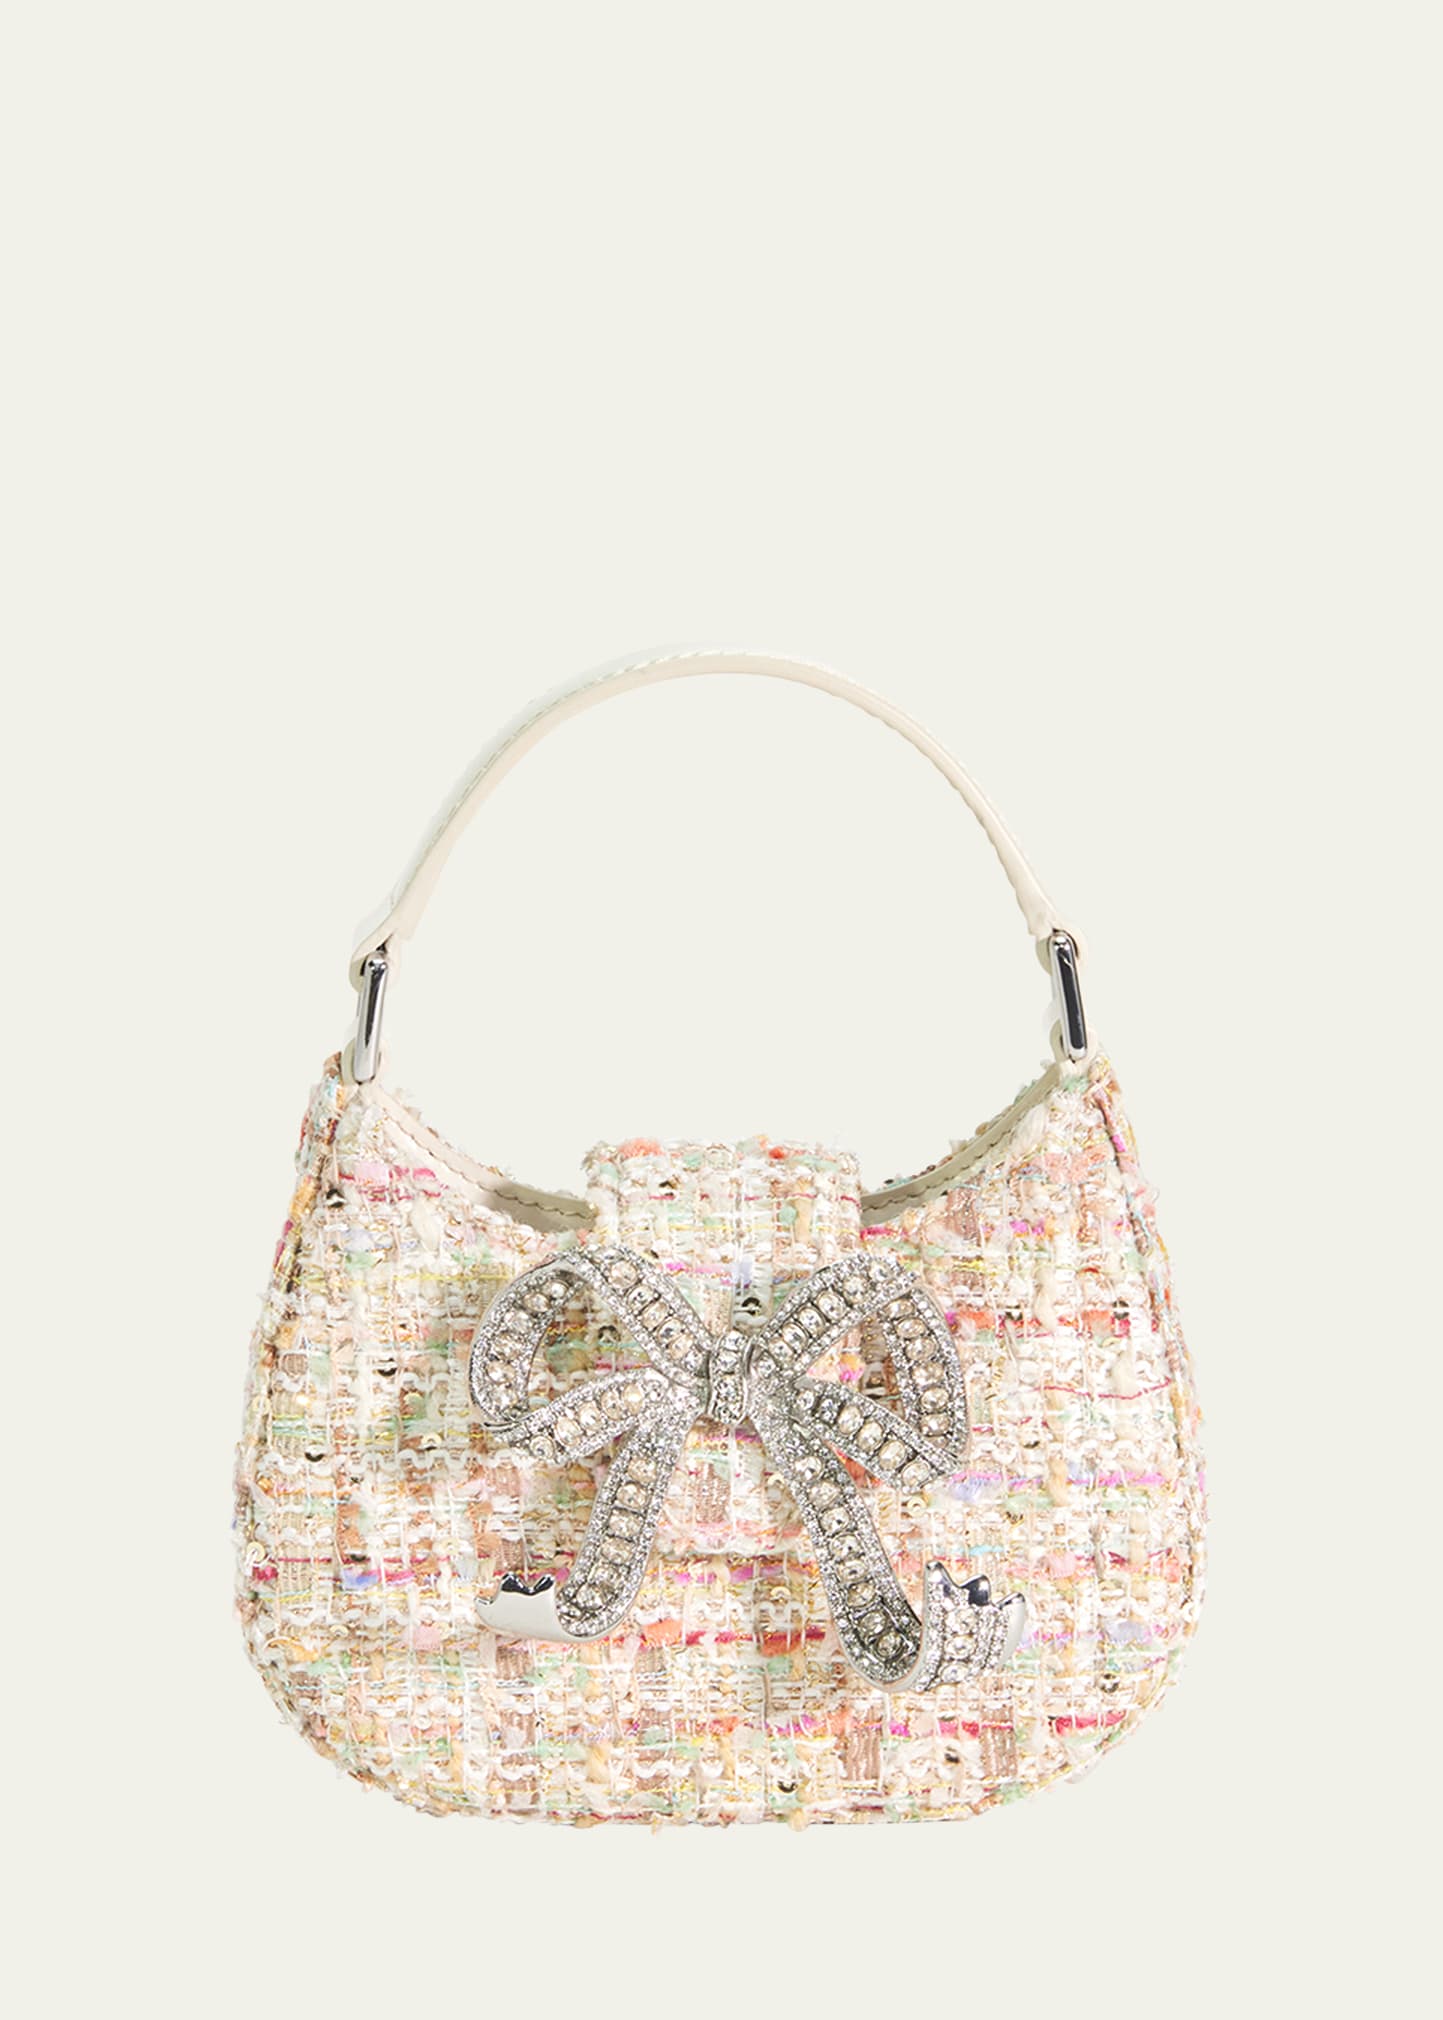 Self-portrait Kids' Girl's Boucle Micro Bag W/ Embellished Bow In Cream